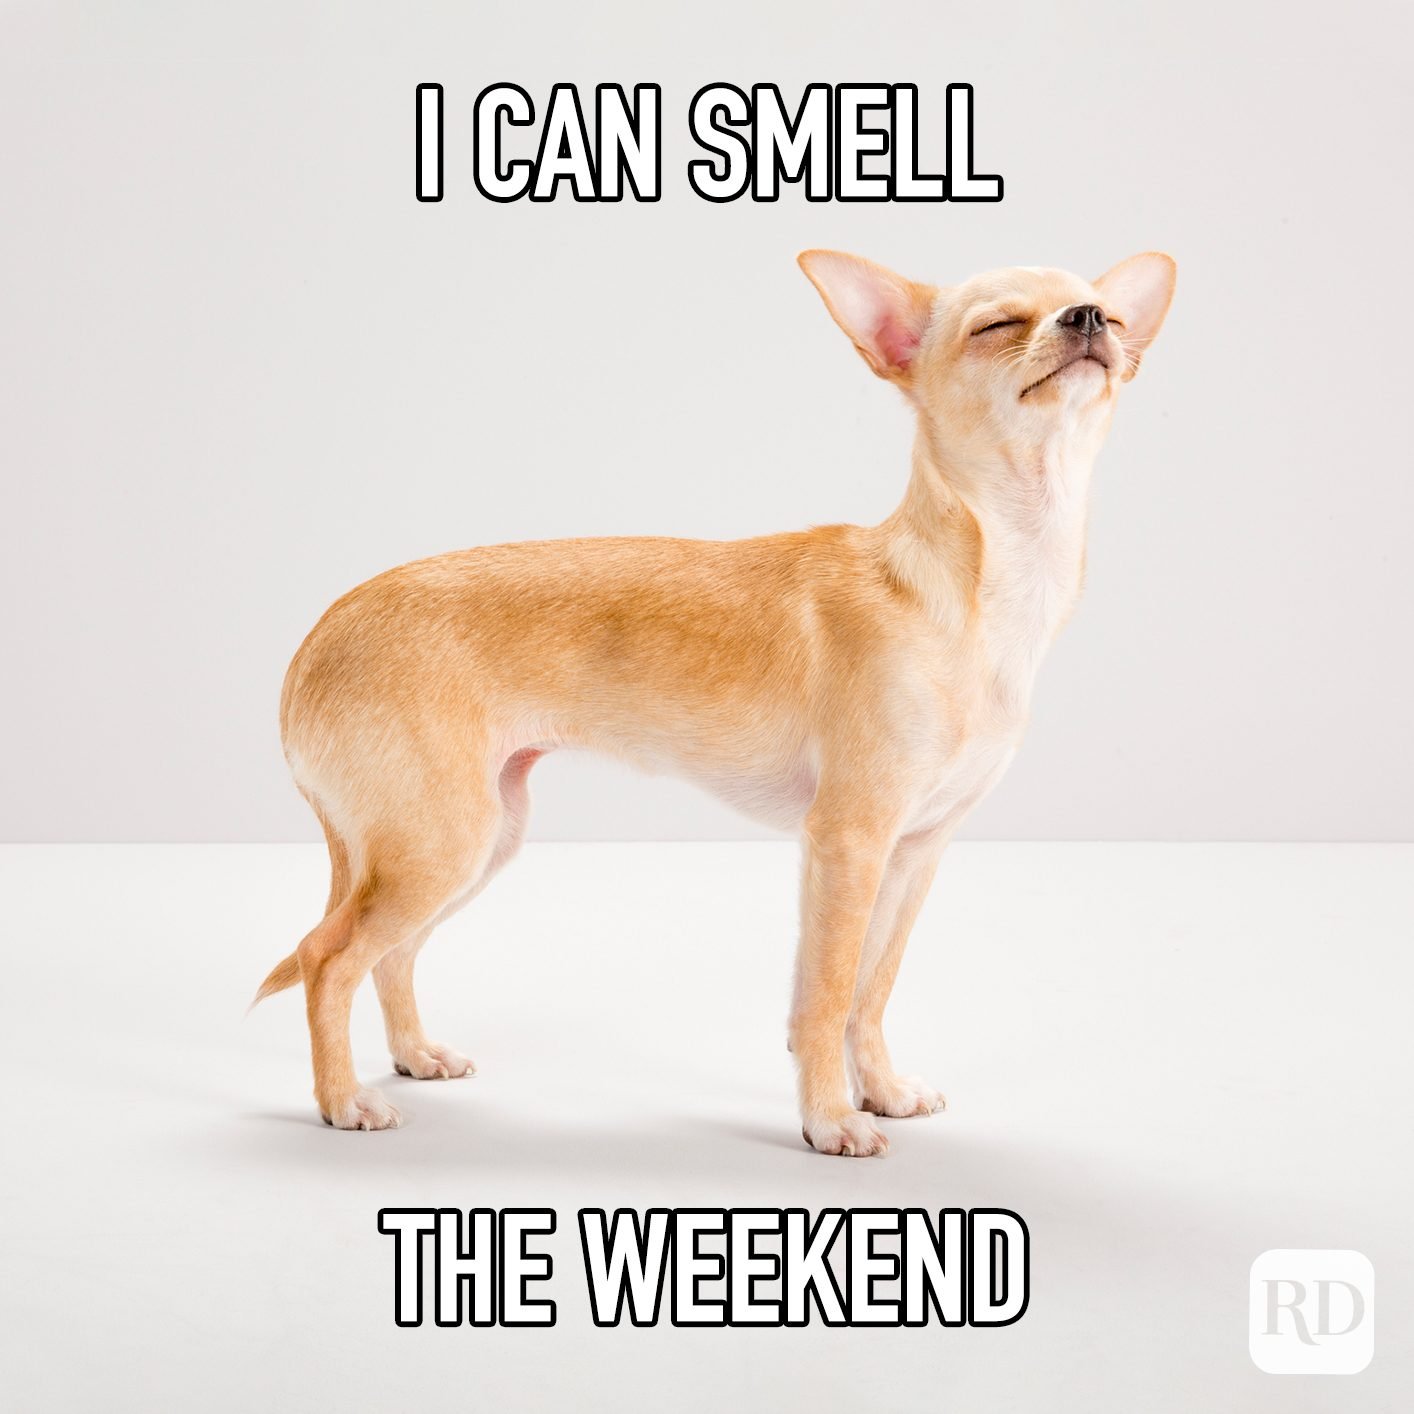 i-can-smell-the-weekend-copy.jpg?fit=335